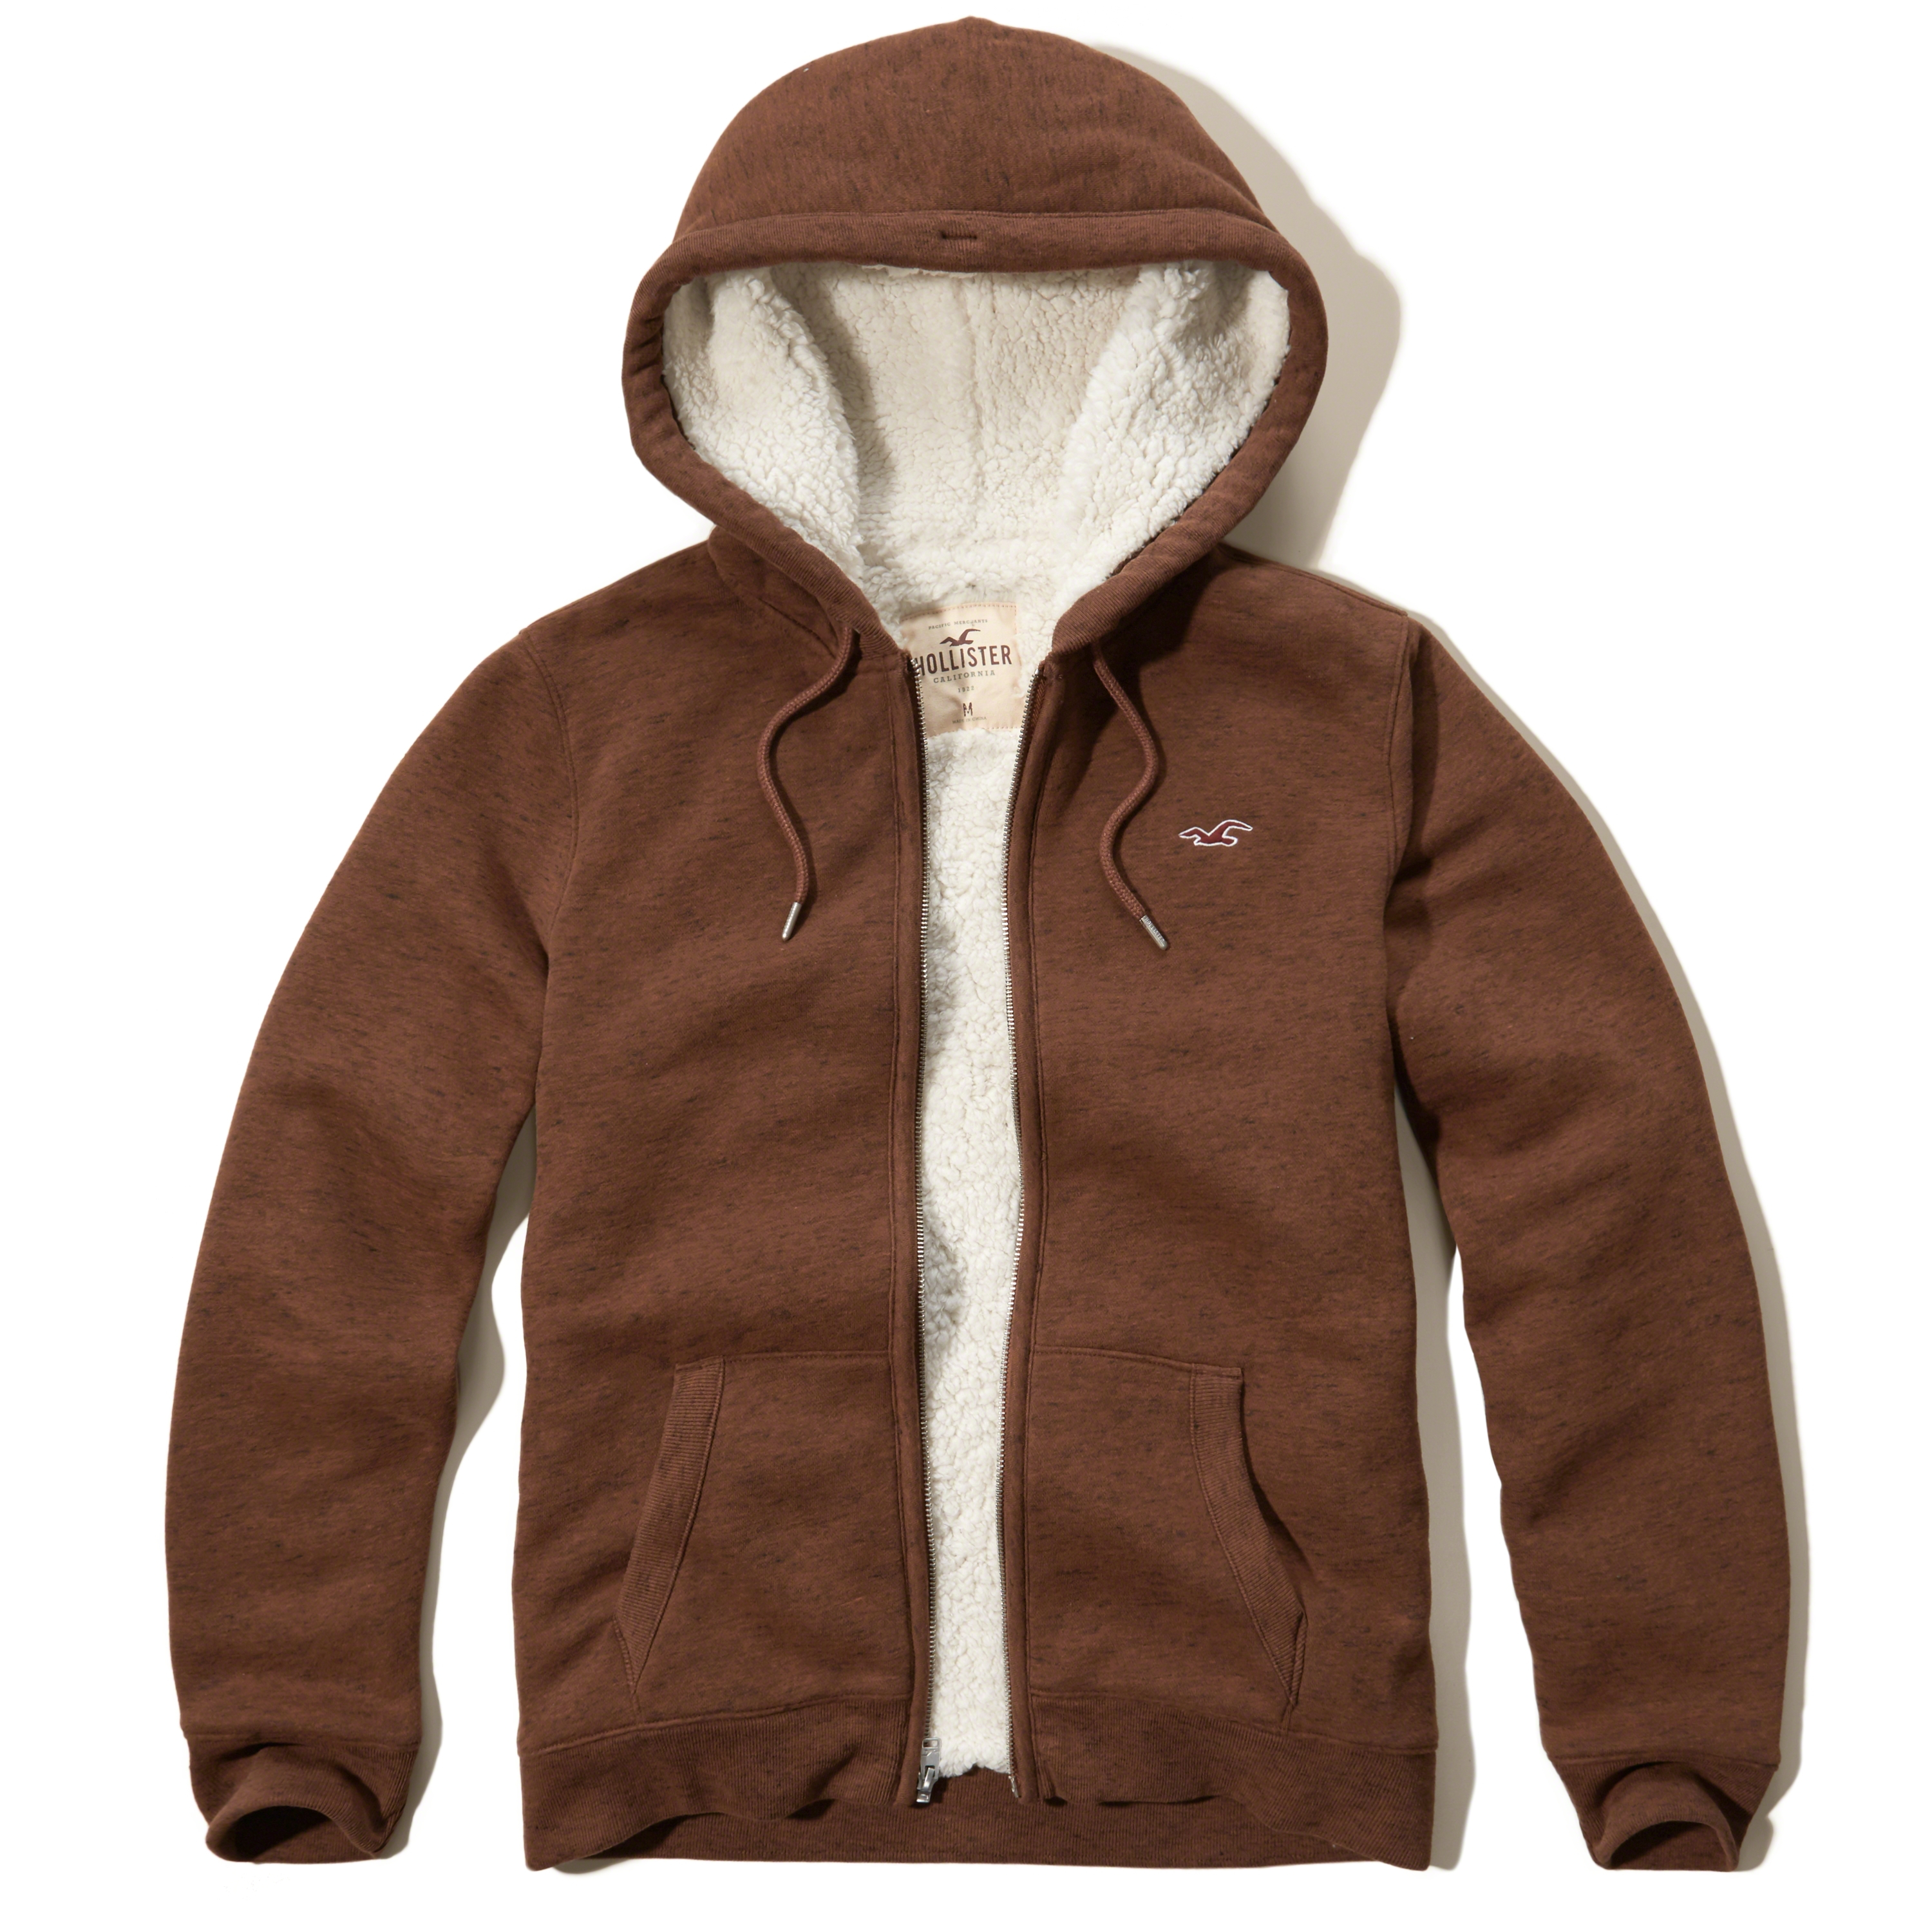 Hollister Textured Sherpa Lined Hoodie in Brown for Men - Lyst